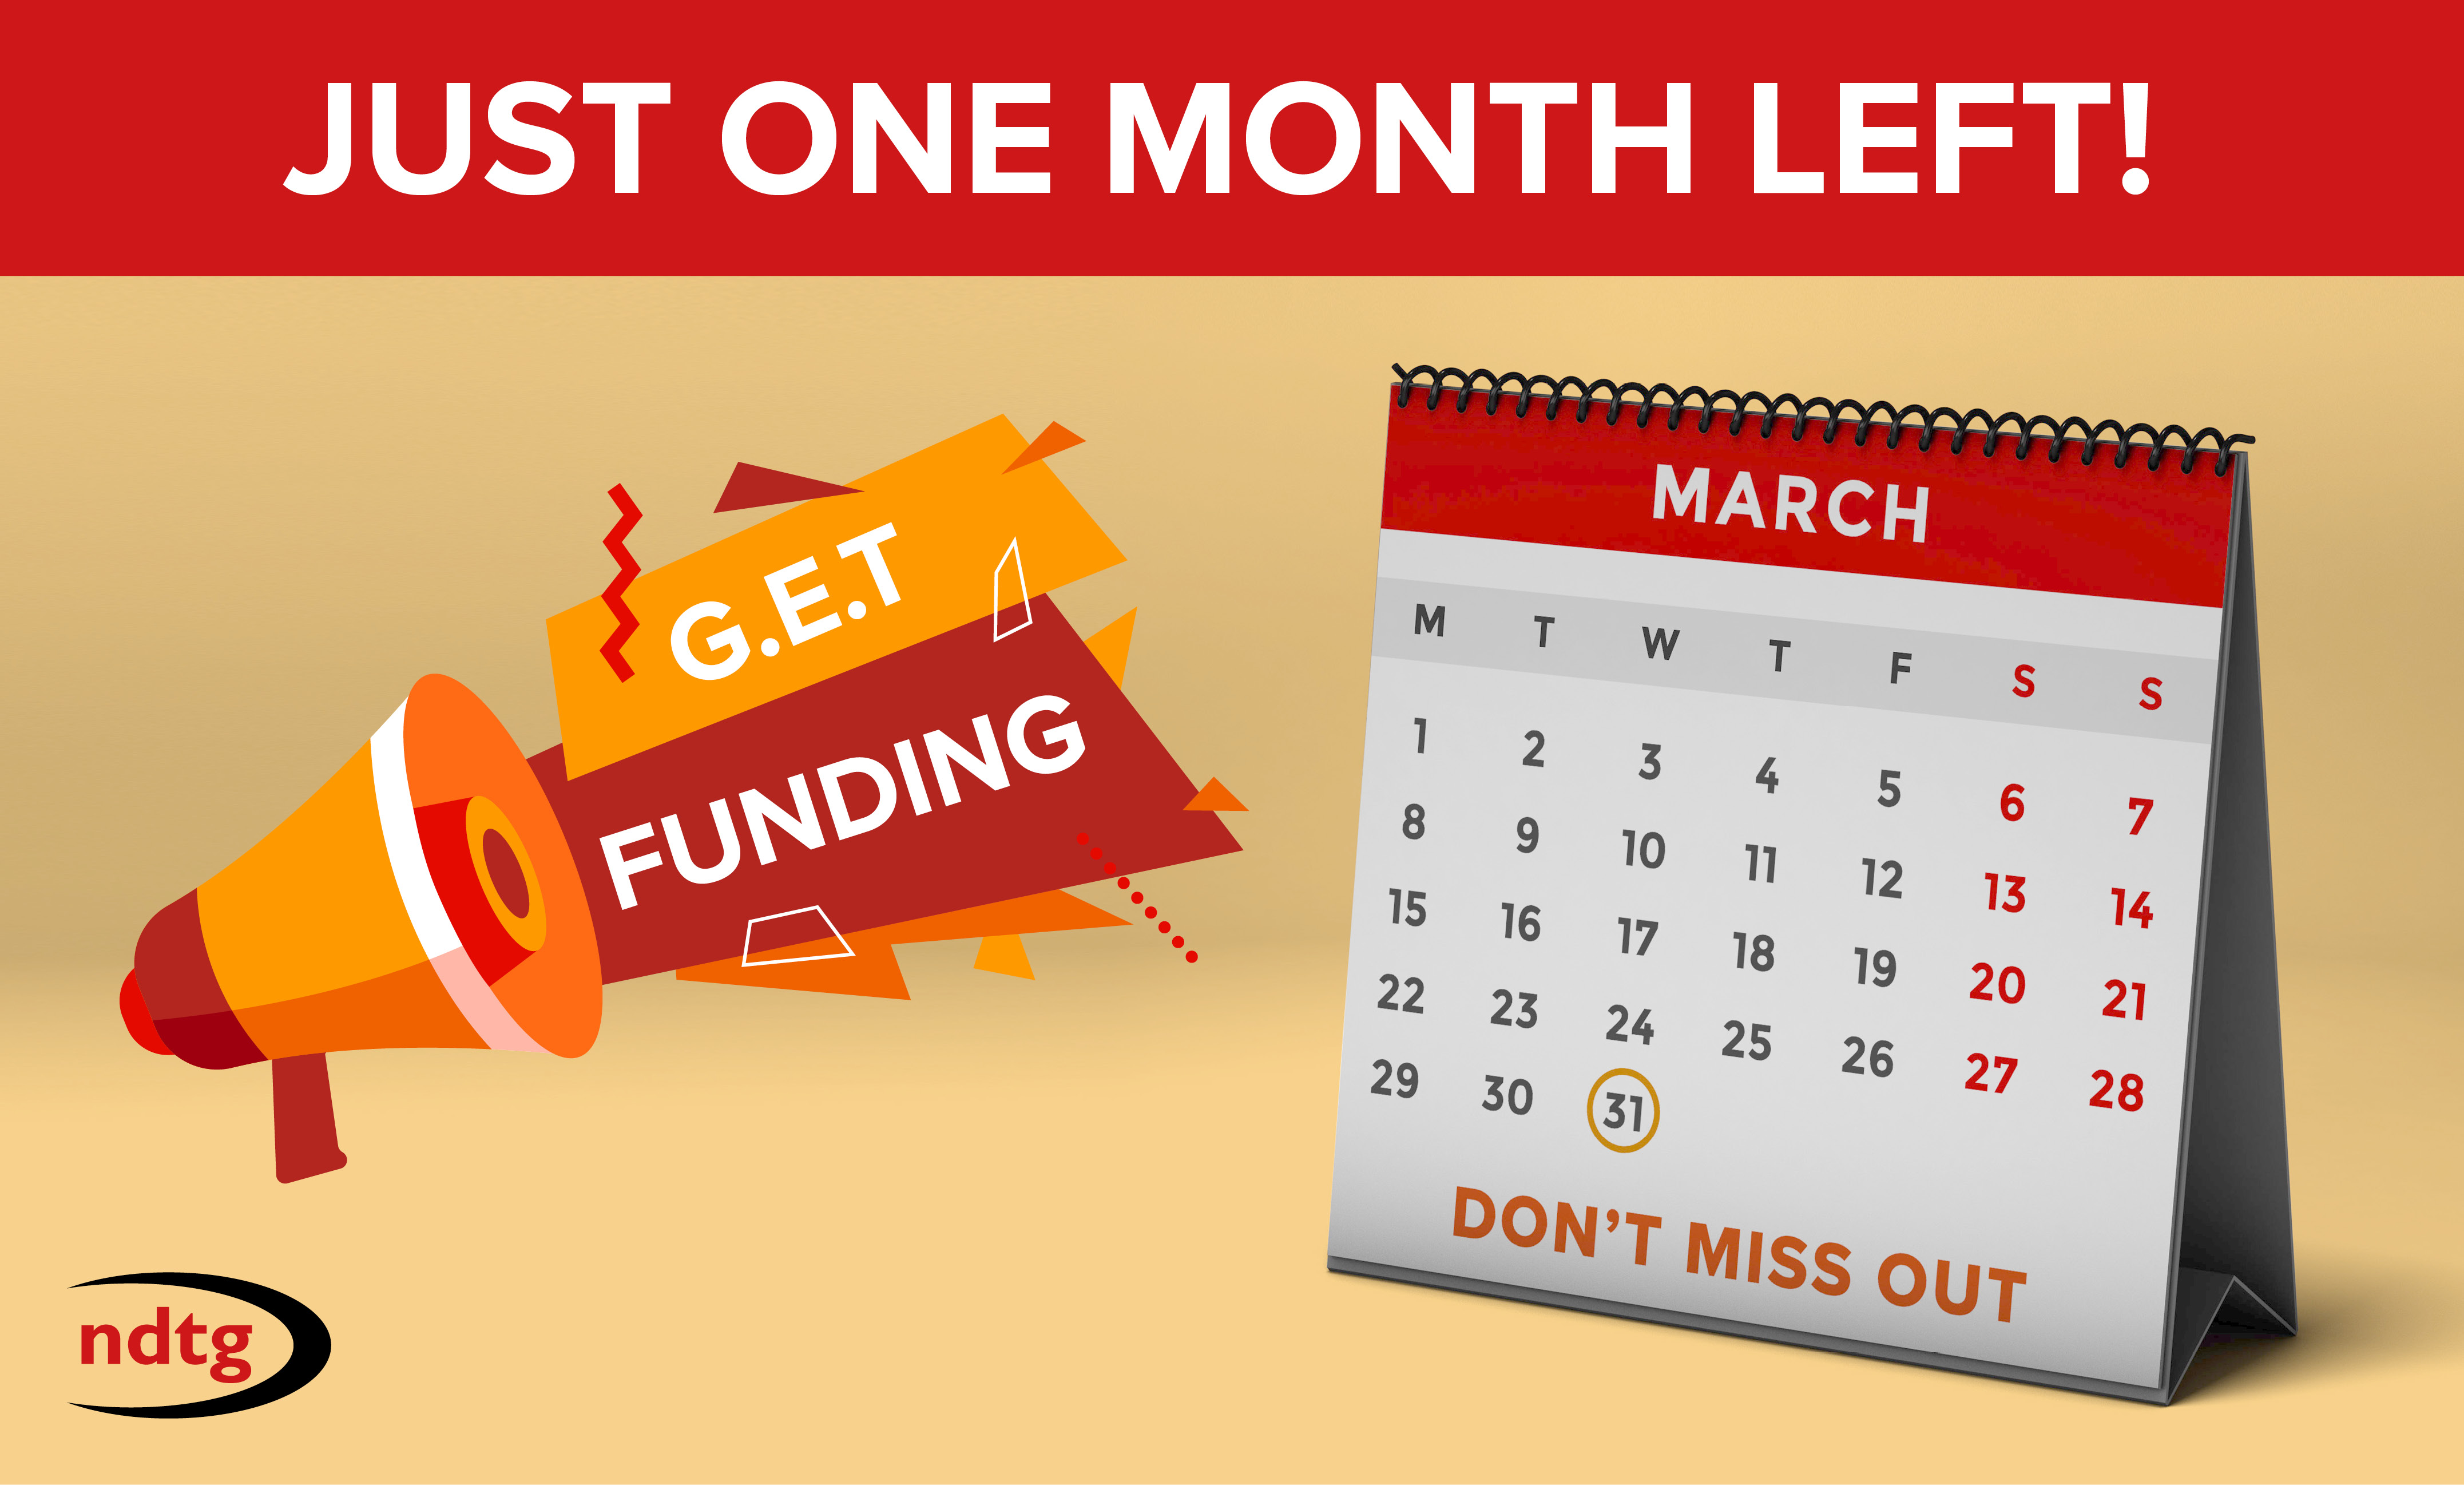 Final Countdown: Just 31 days left to G.E.T Funding